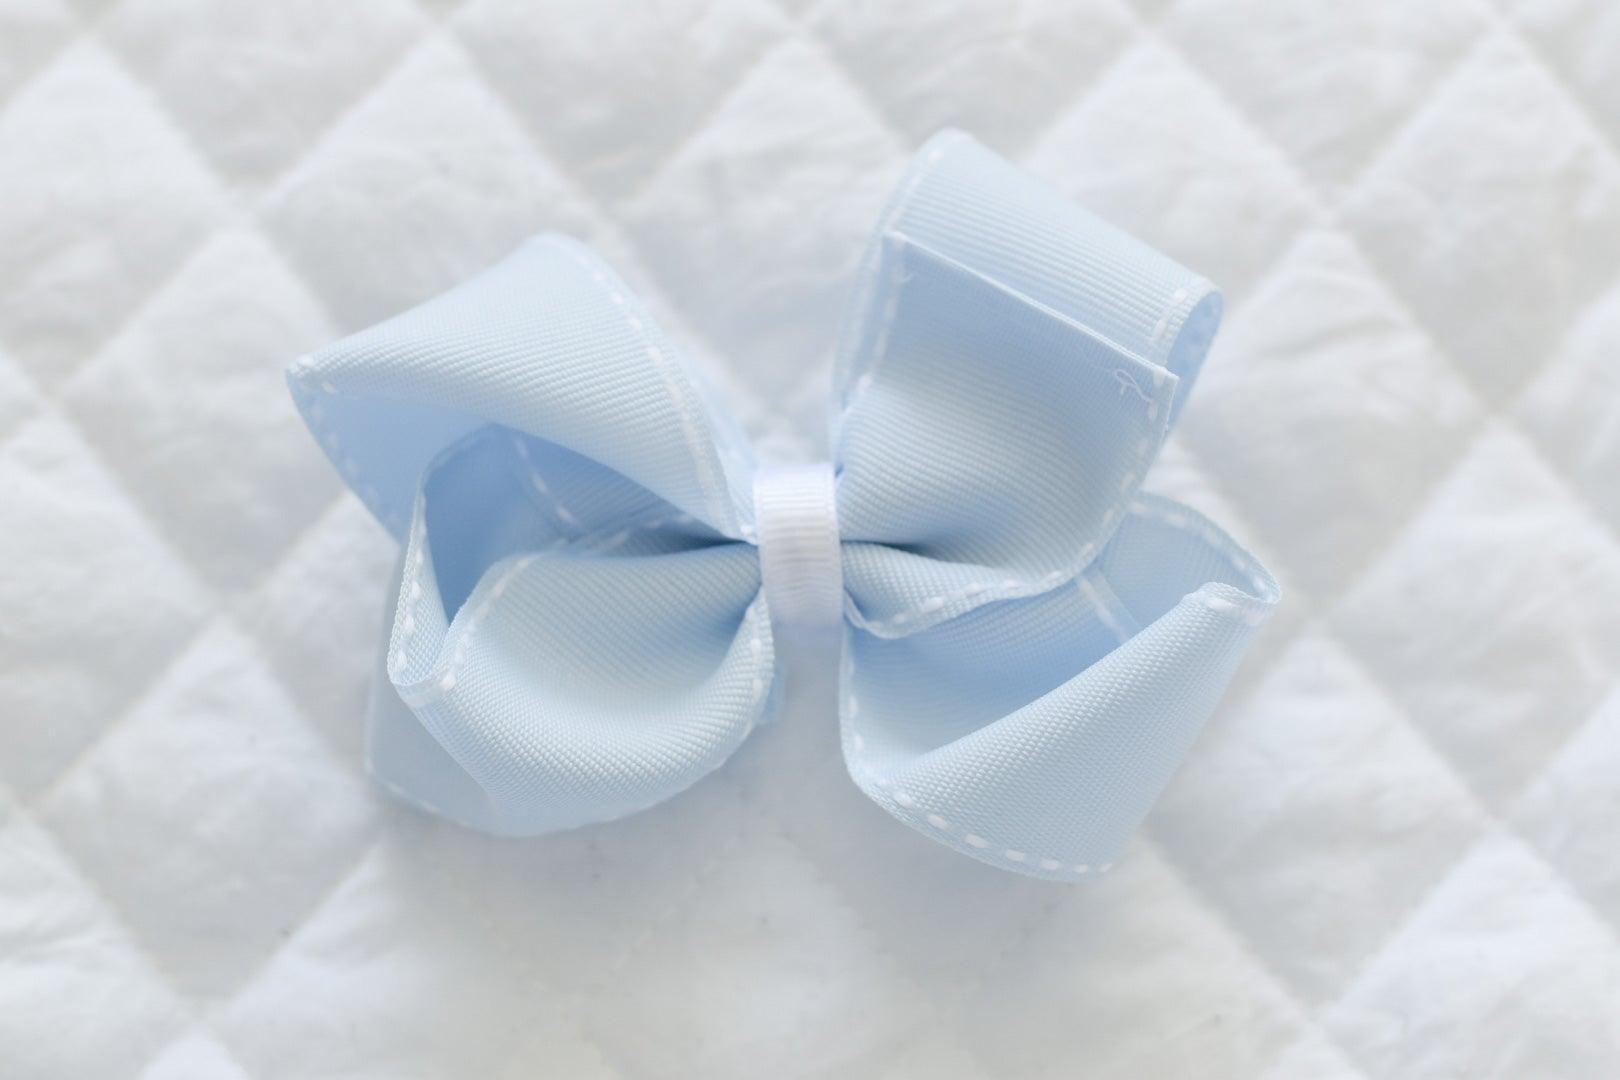 Sissy Bow - Blue Stitch | Nashville Bow Co. - Classic Hair Bows, Bow Ties, Basket Bows, Pacifier Clips, Wreath Sashes, Swaddle Bows. Classic Southern Charm.